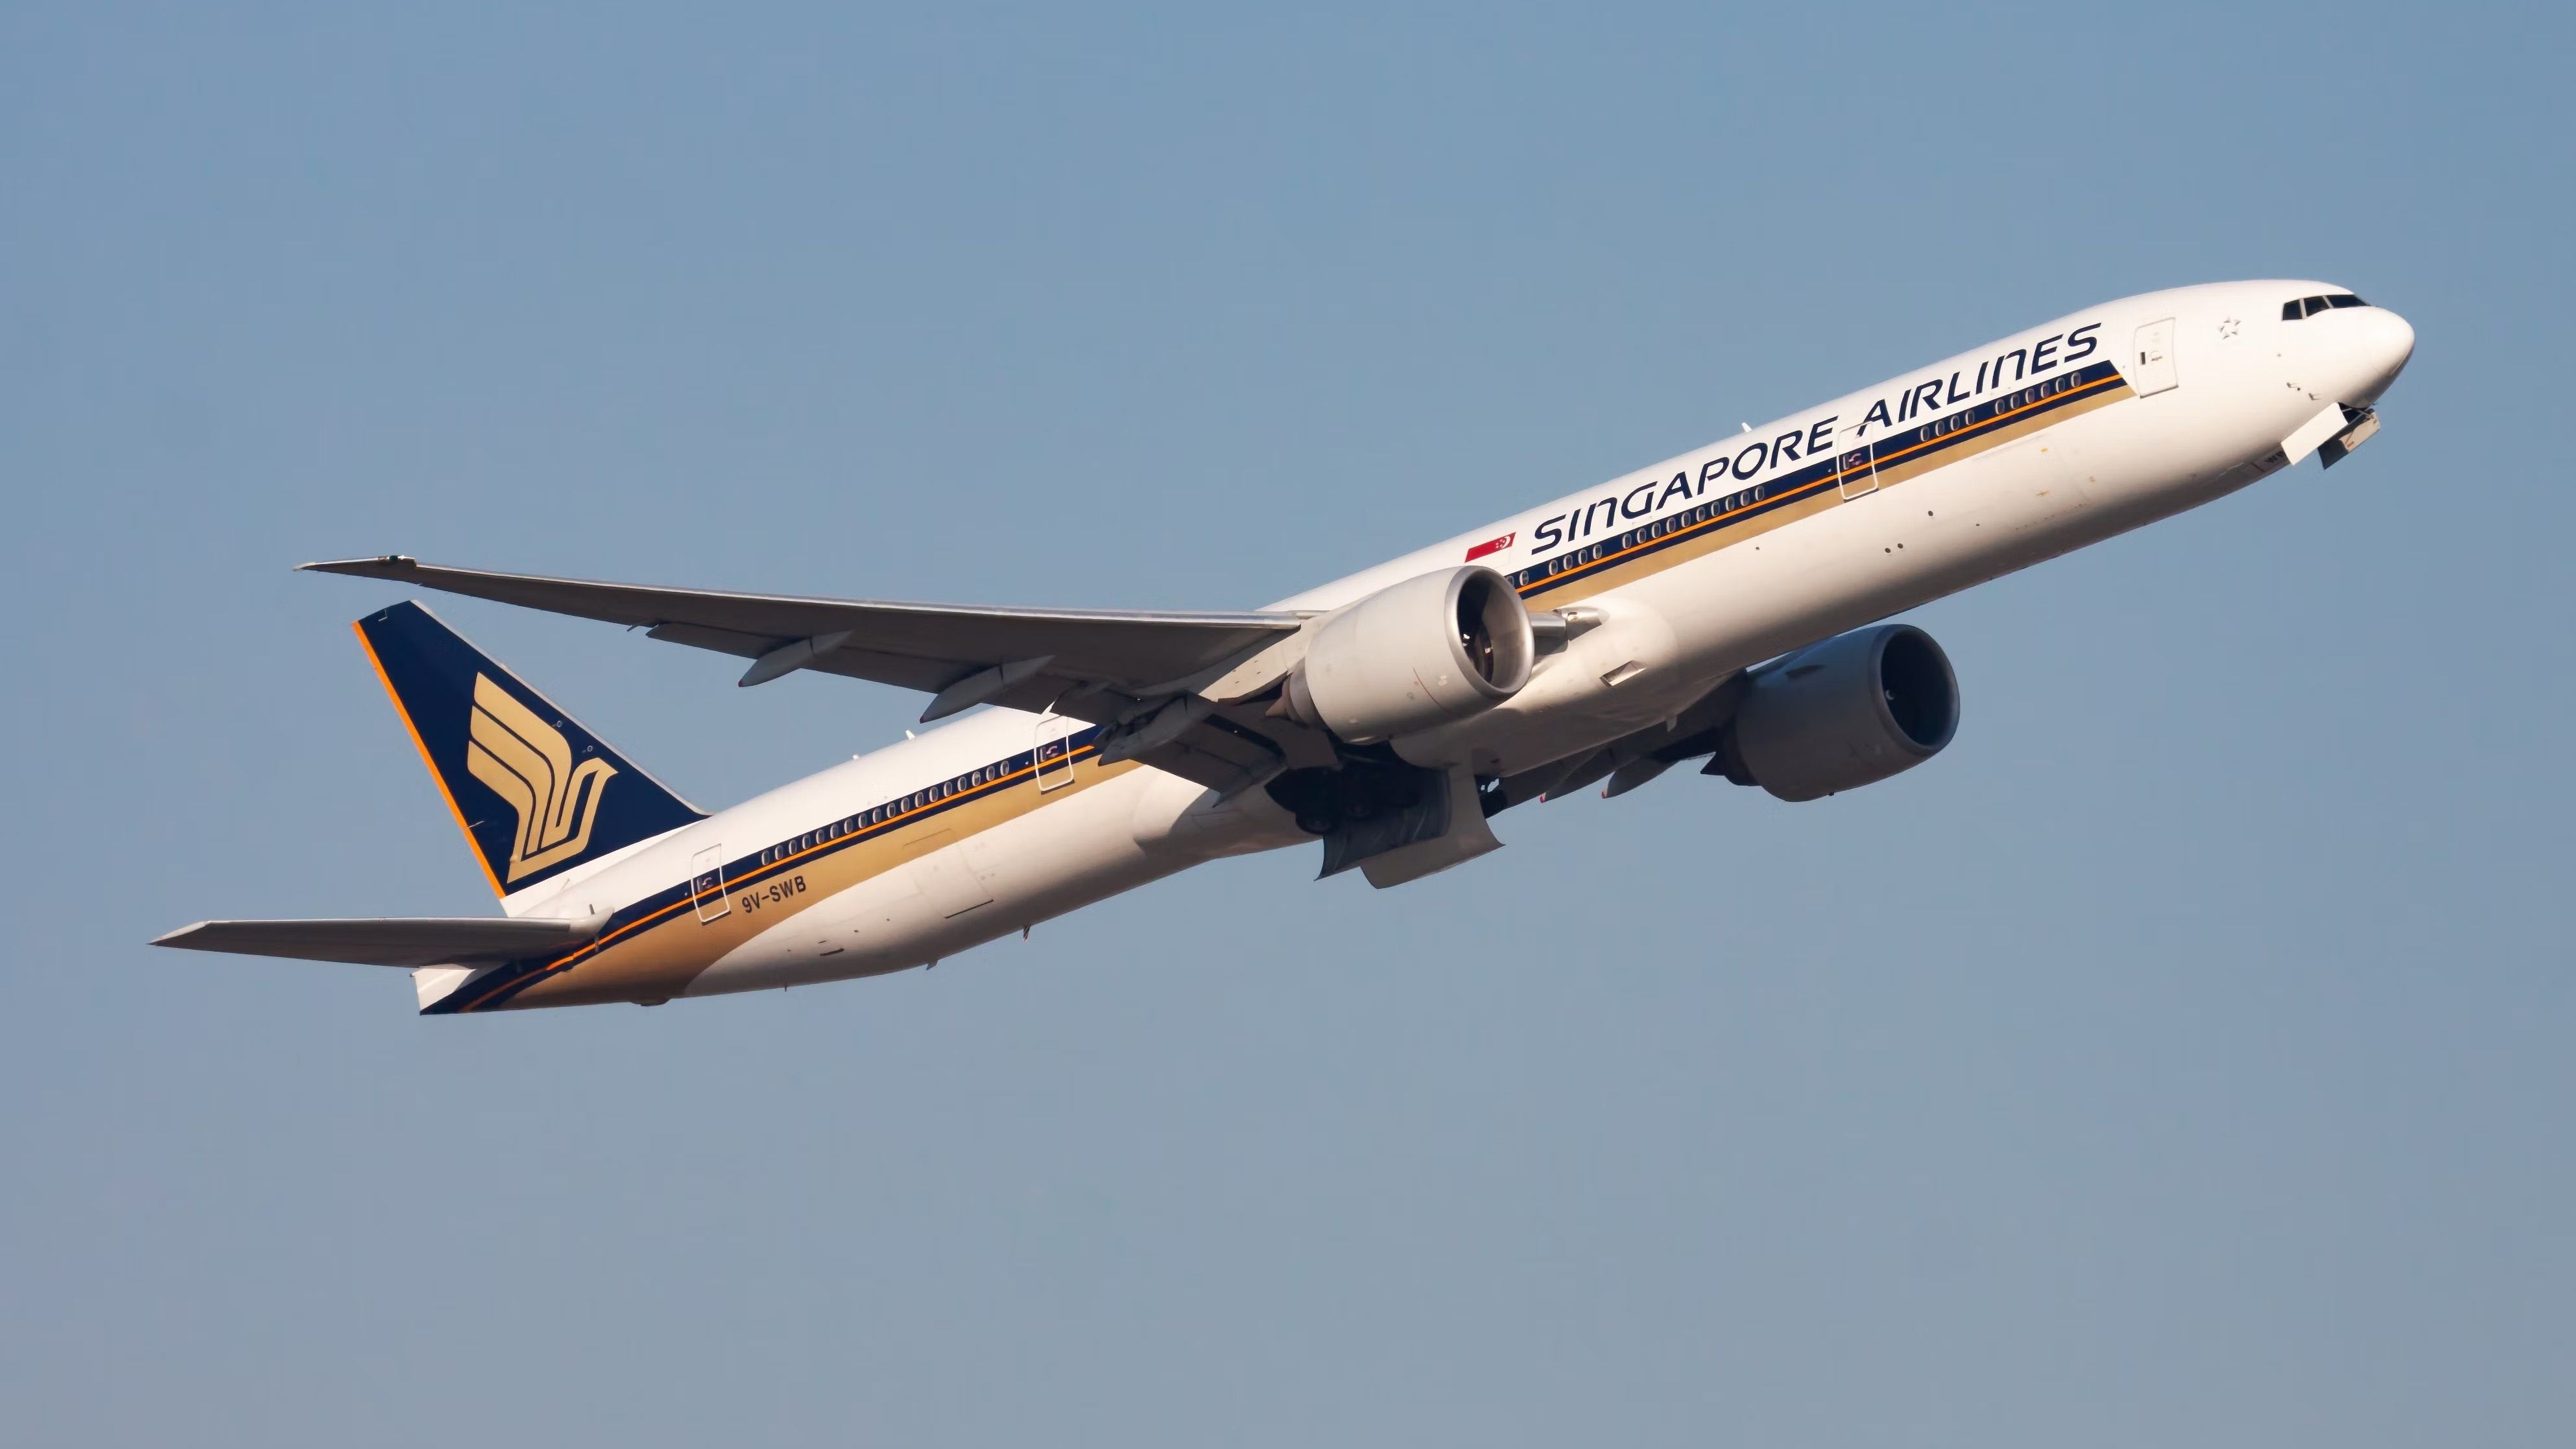 A Singapore Airlines Boeing 777-300ER flying in the sky.